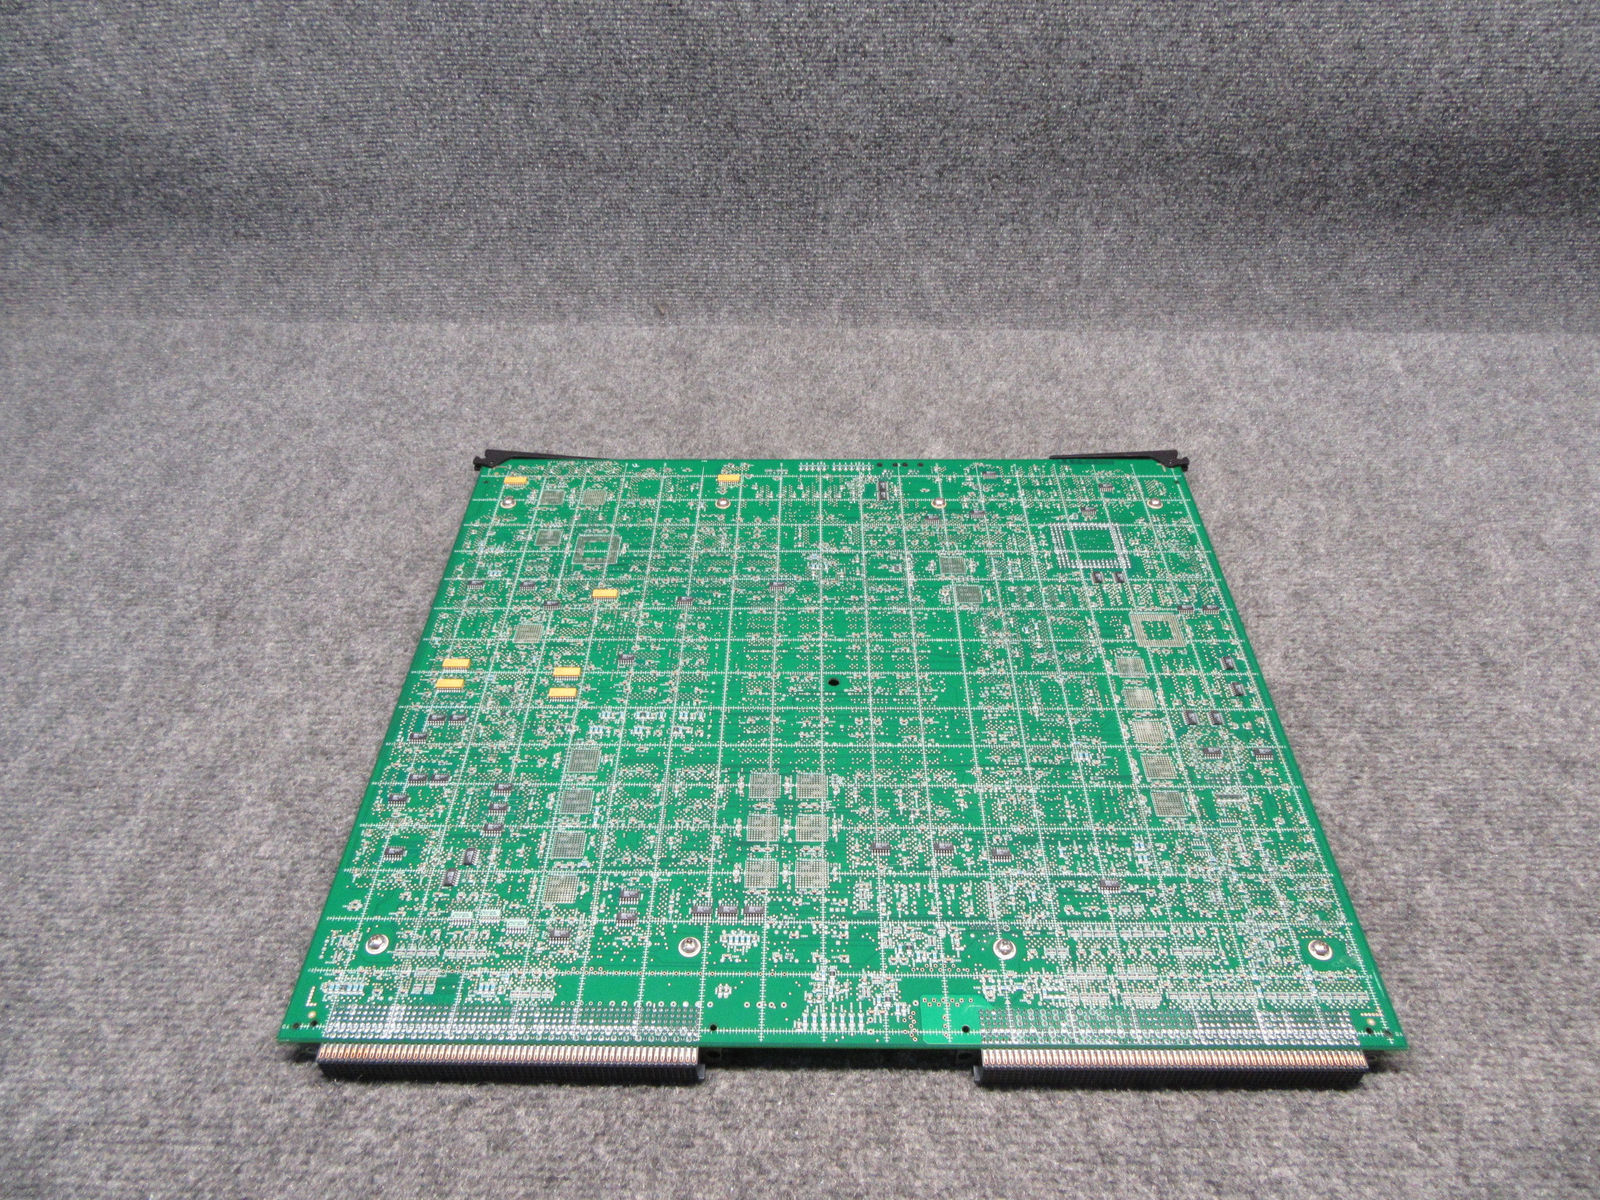 08241472 Circuit Board For Siemens Acuson Sequoia C256 Ultrasound DIAGNOSTIC ULTRASOUND MACHINES FOR SALE